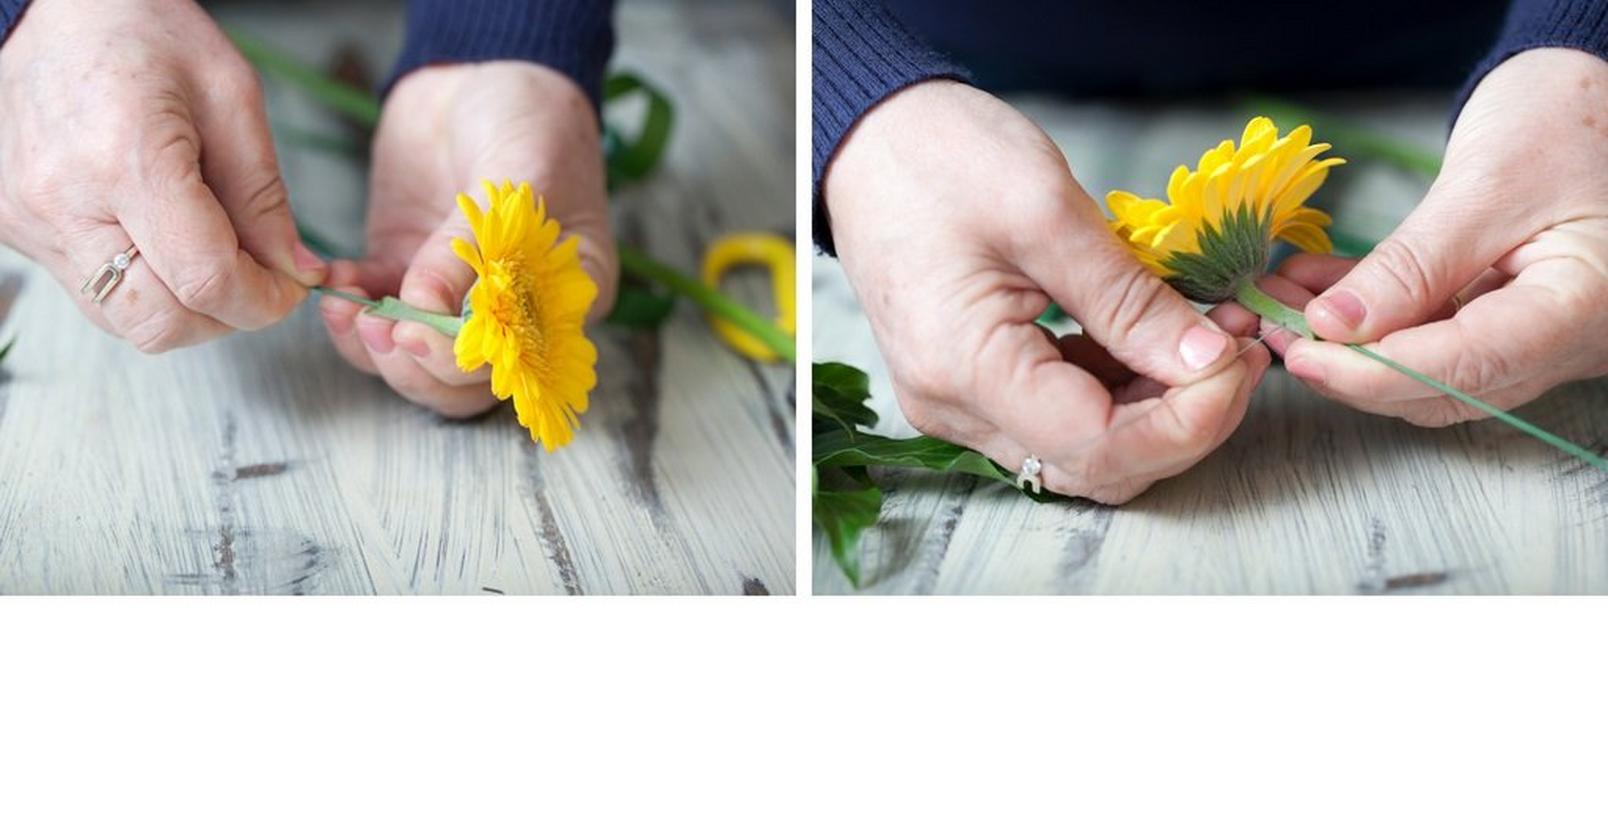 how-to-make-a-flower-crown-cutting-stems